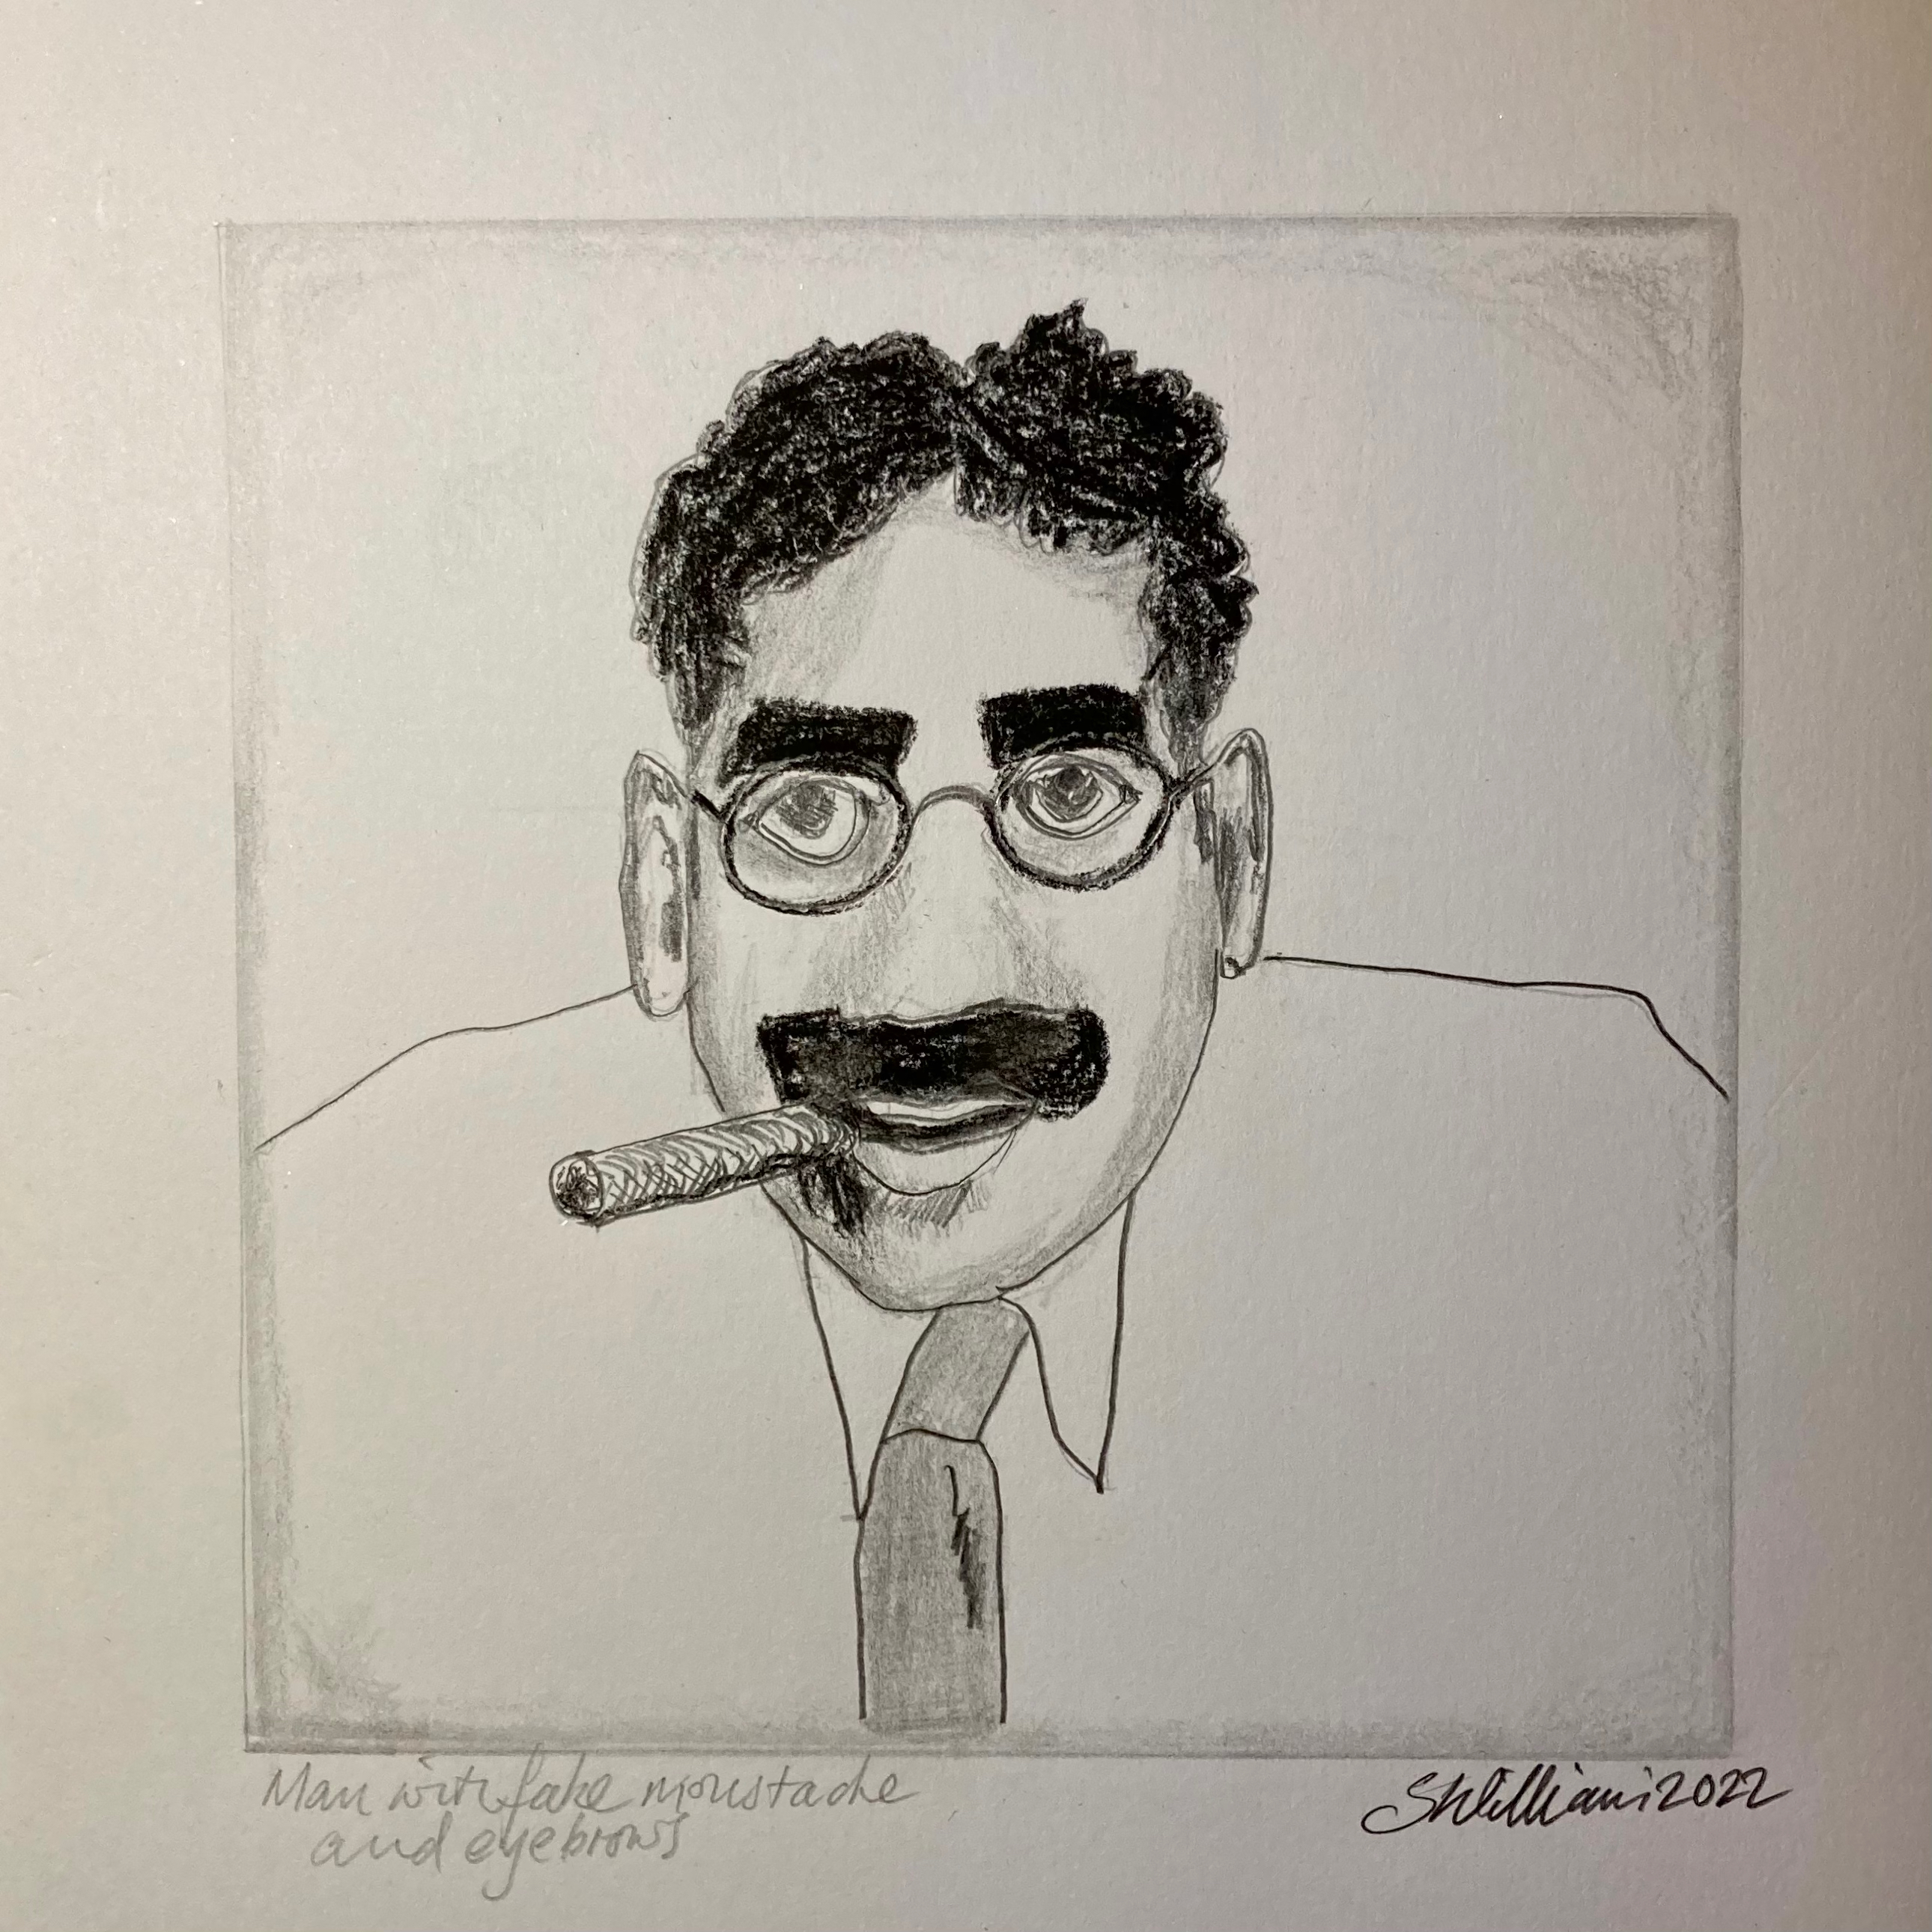 Man with fake moustache and eyebrows (pencil and charcoal, 20220322) Stephen J. Williams